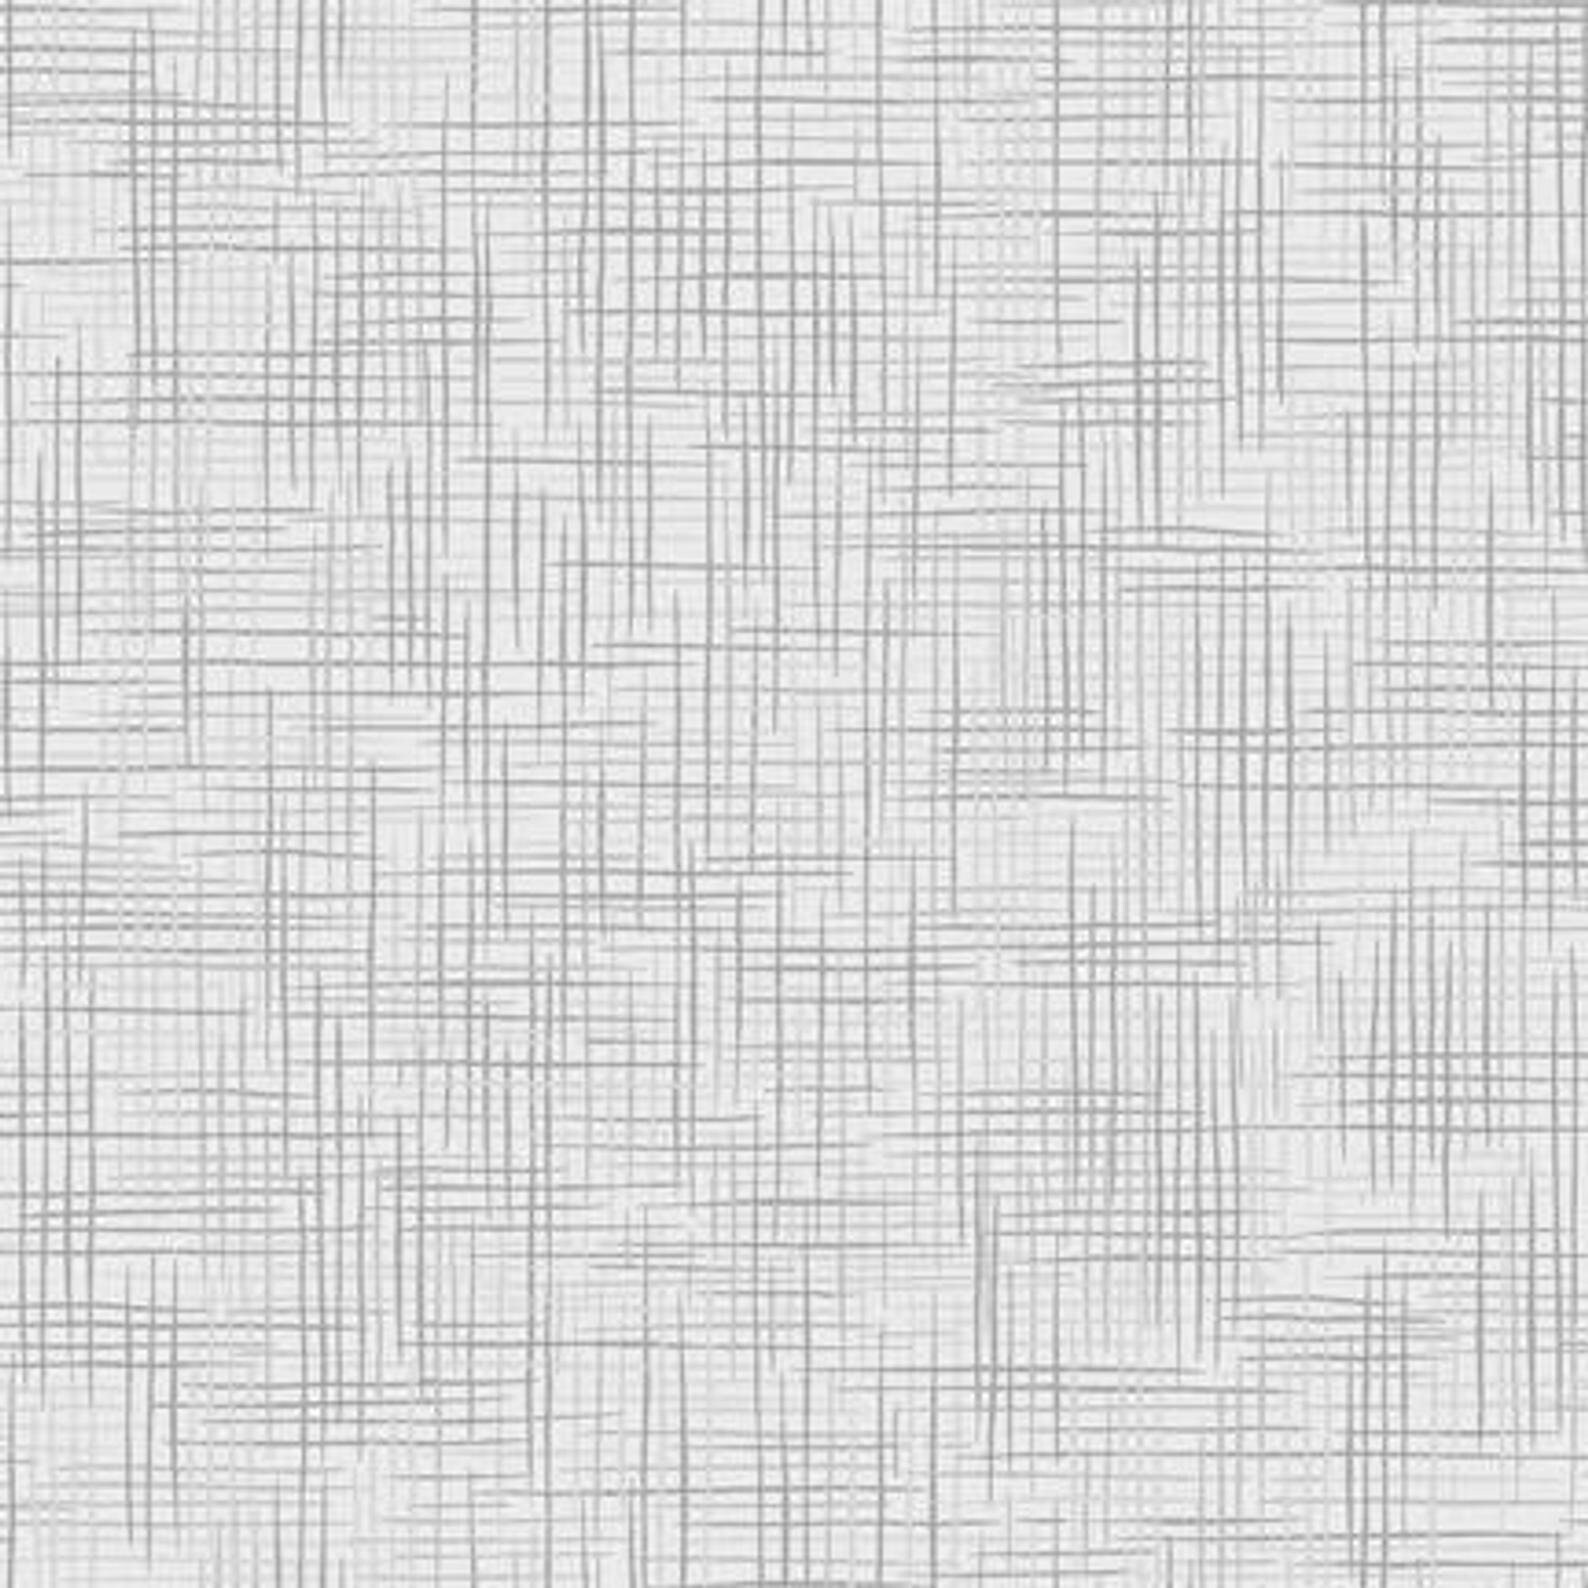 Harmony Woven in Ash - Gray Cotton Blender By Quilting Treasures 24776-K Yardage Cut Continuously